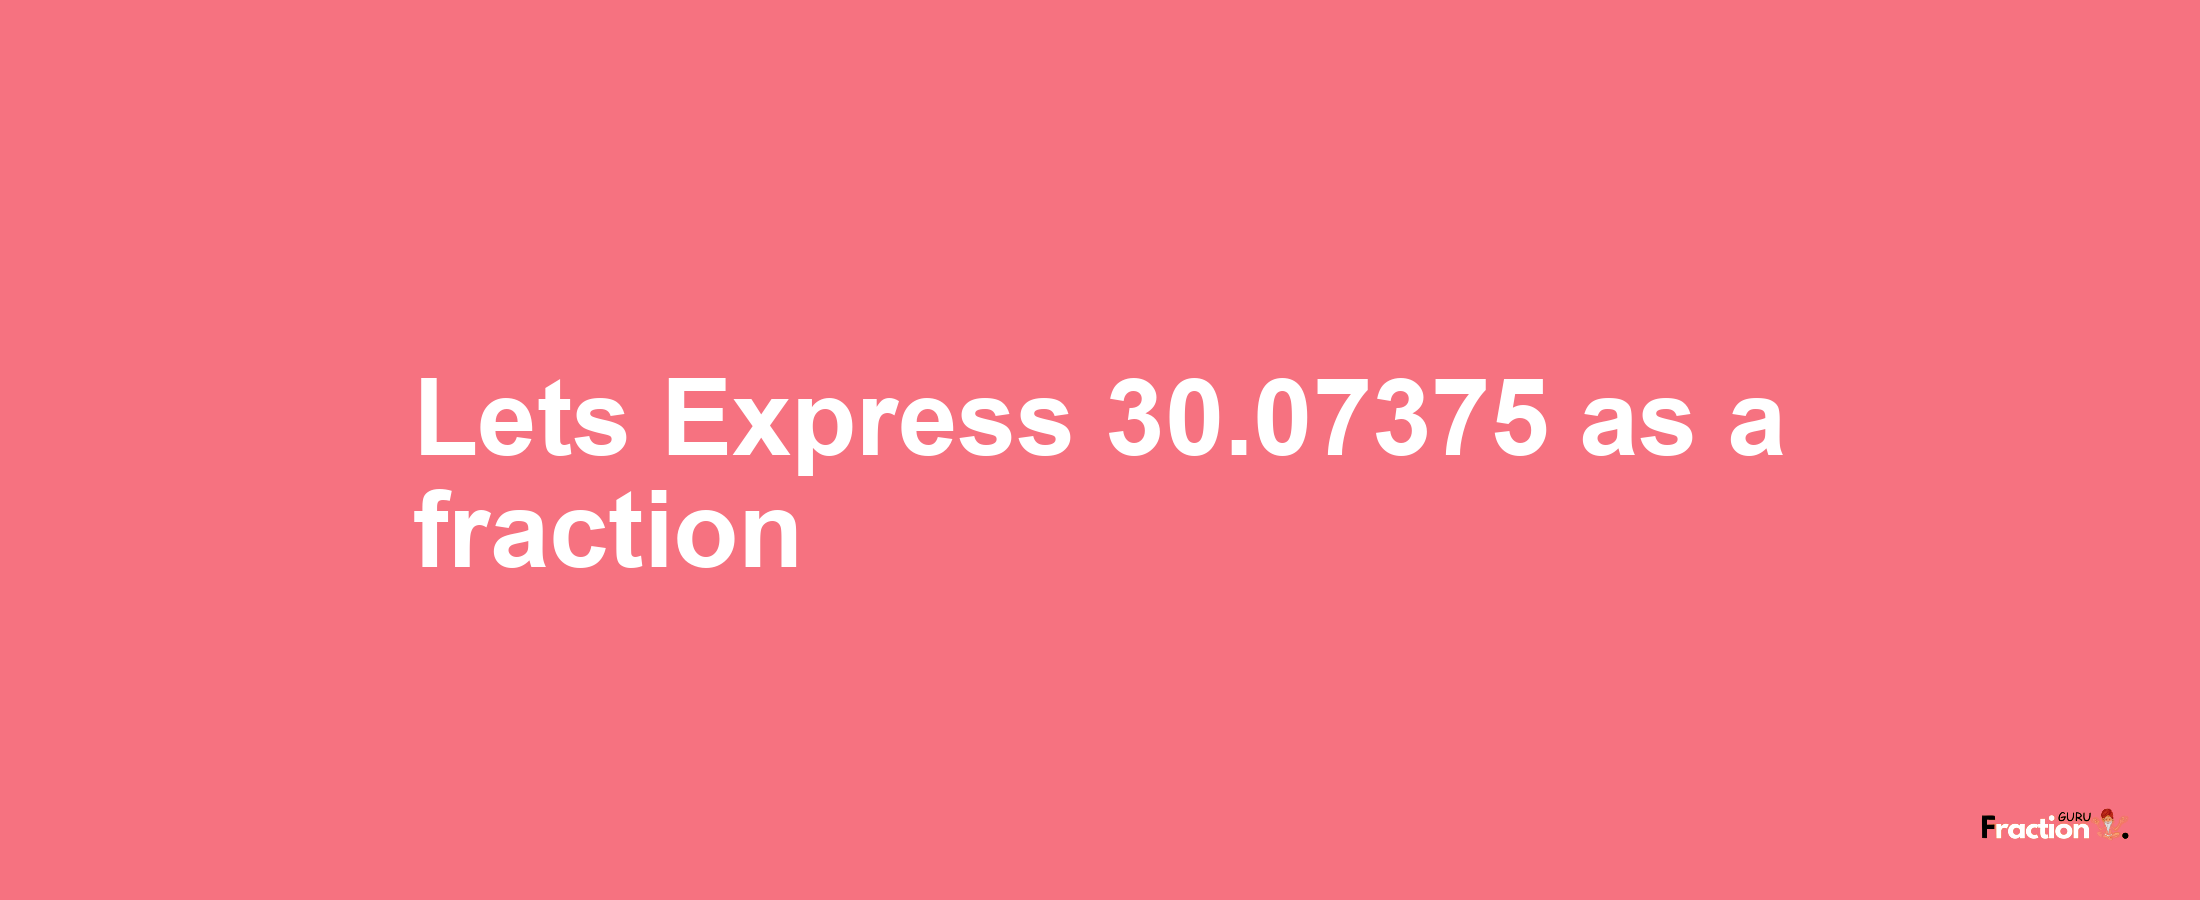 Lets Express 30.07375 as afraction